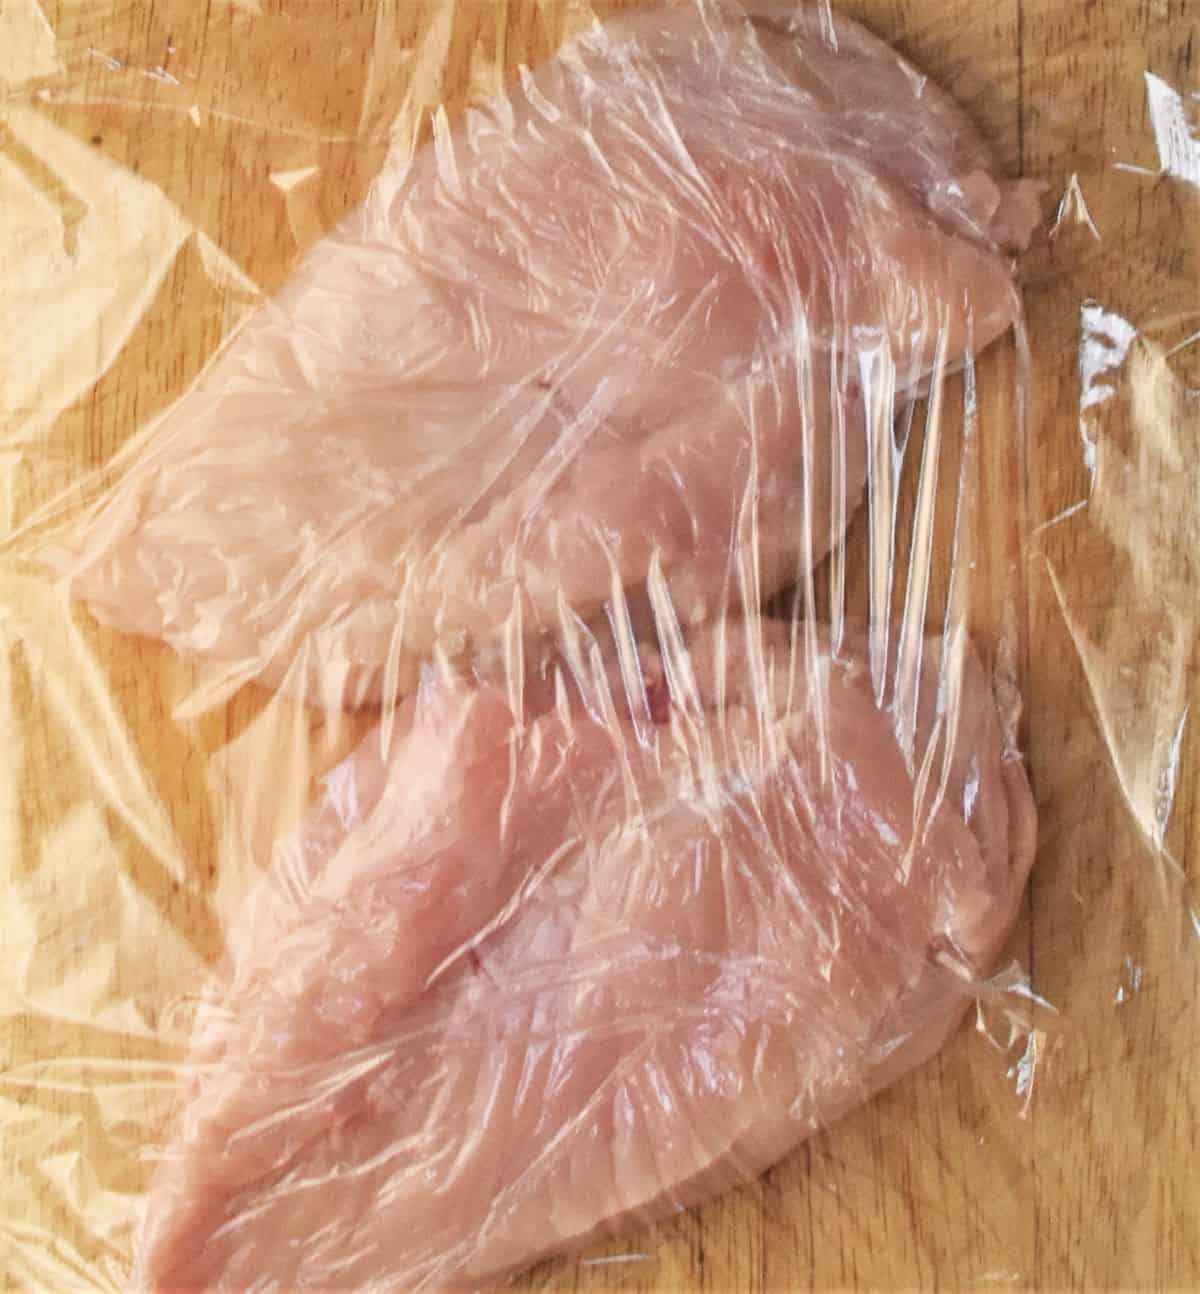 2 chicken breasts covered with plastic wrap on cutting board.